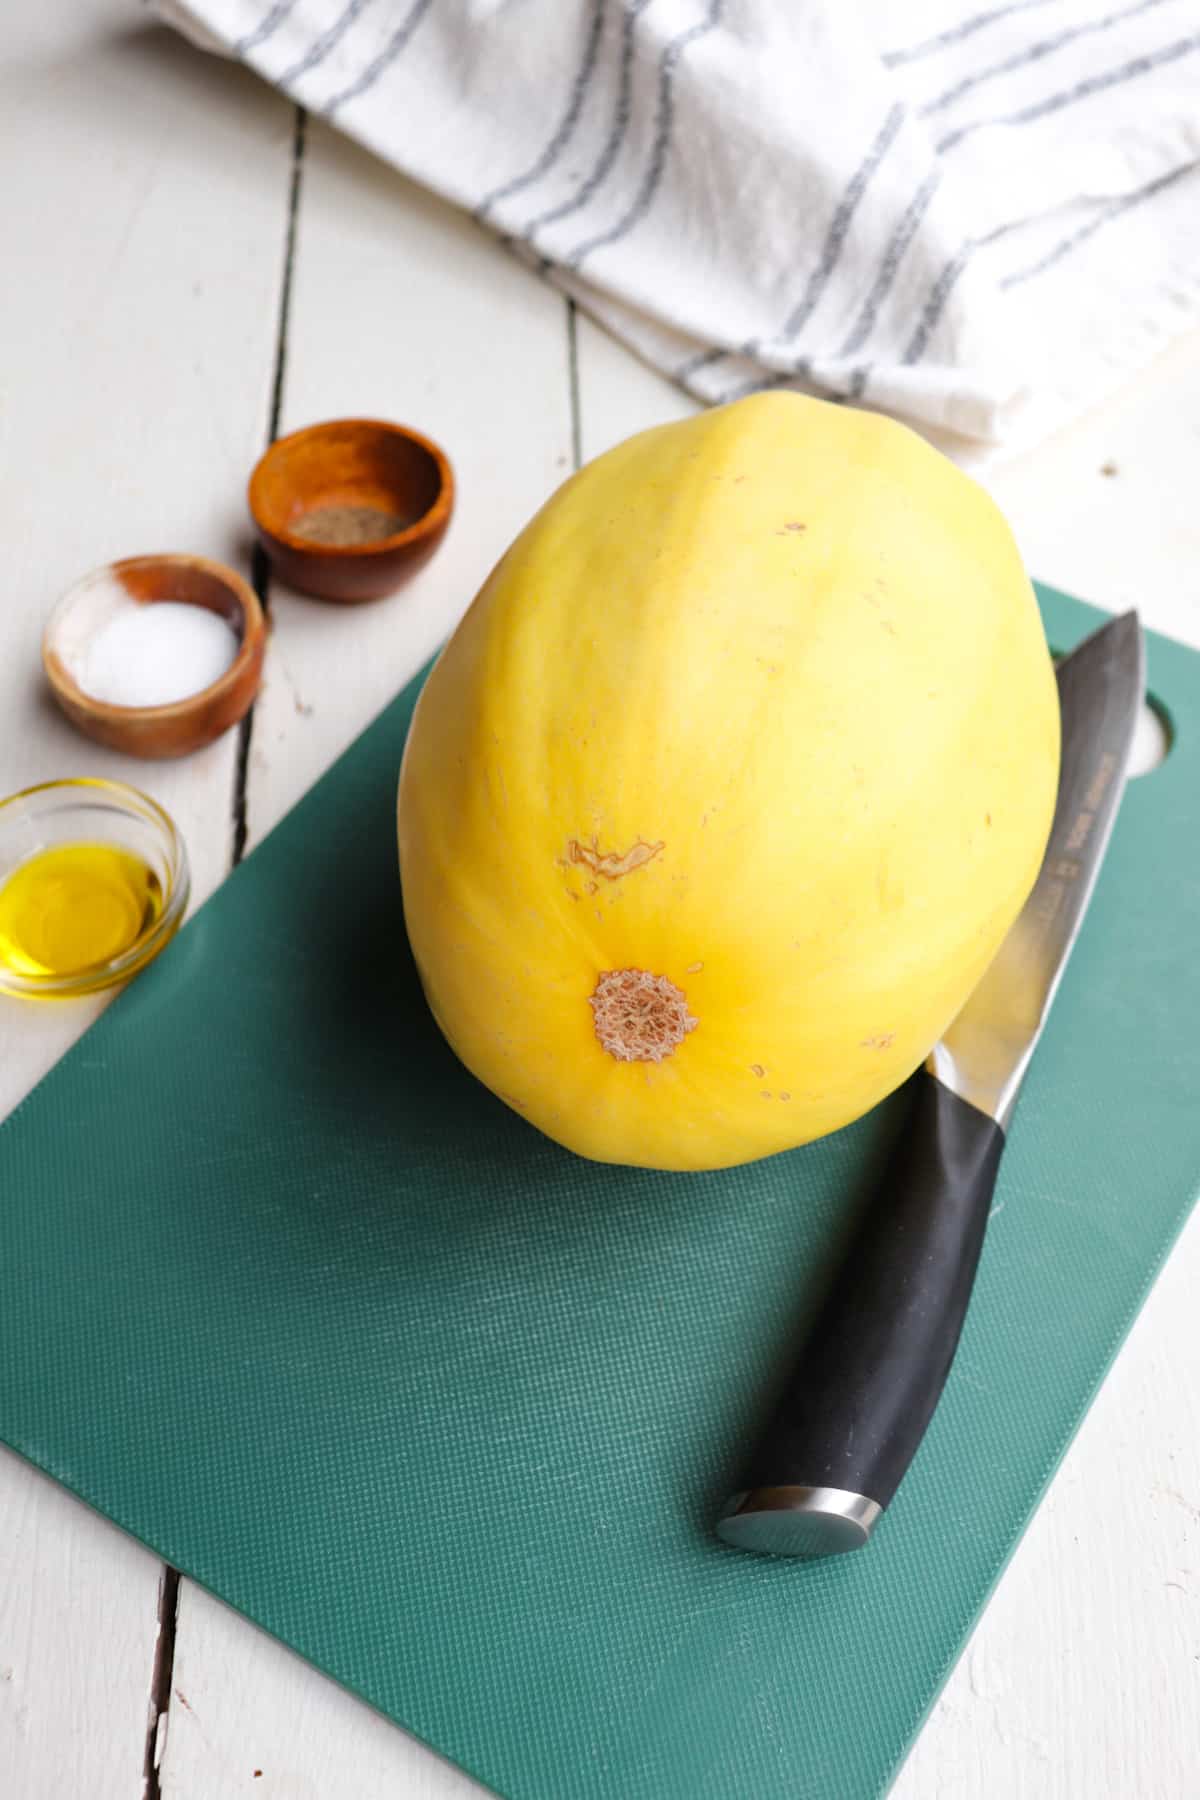 spaghetti squash and seasoning ingredients on a white table.